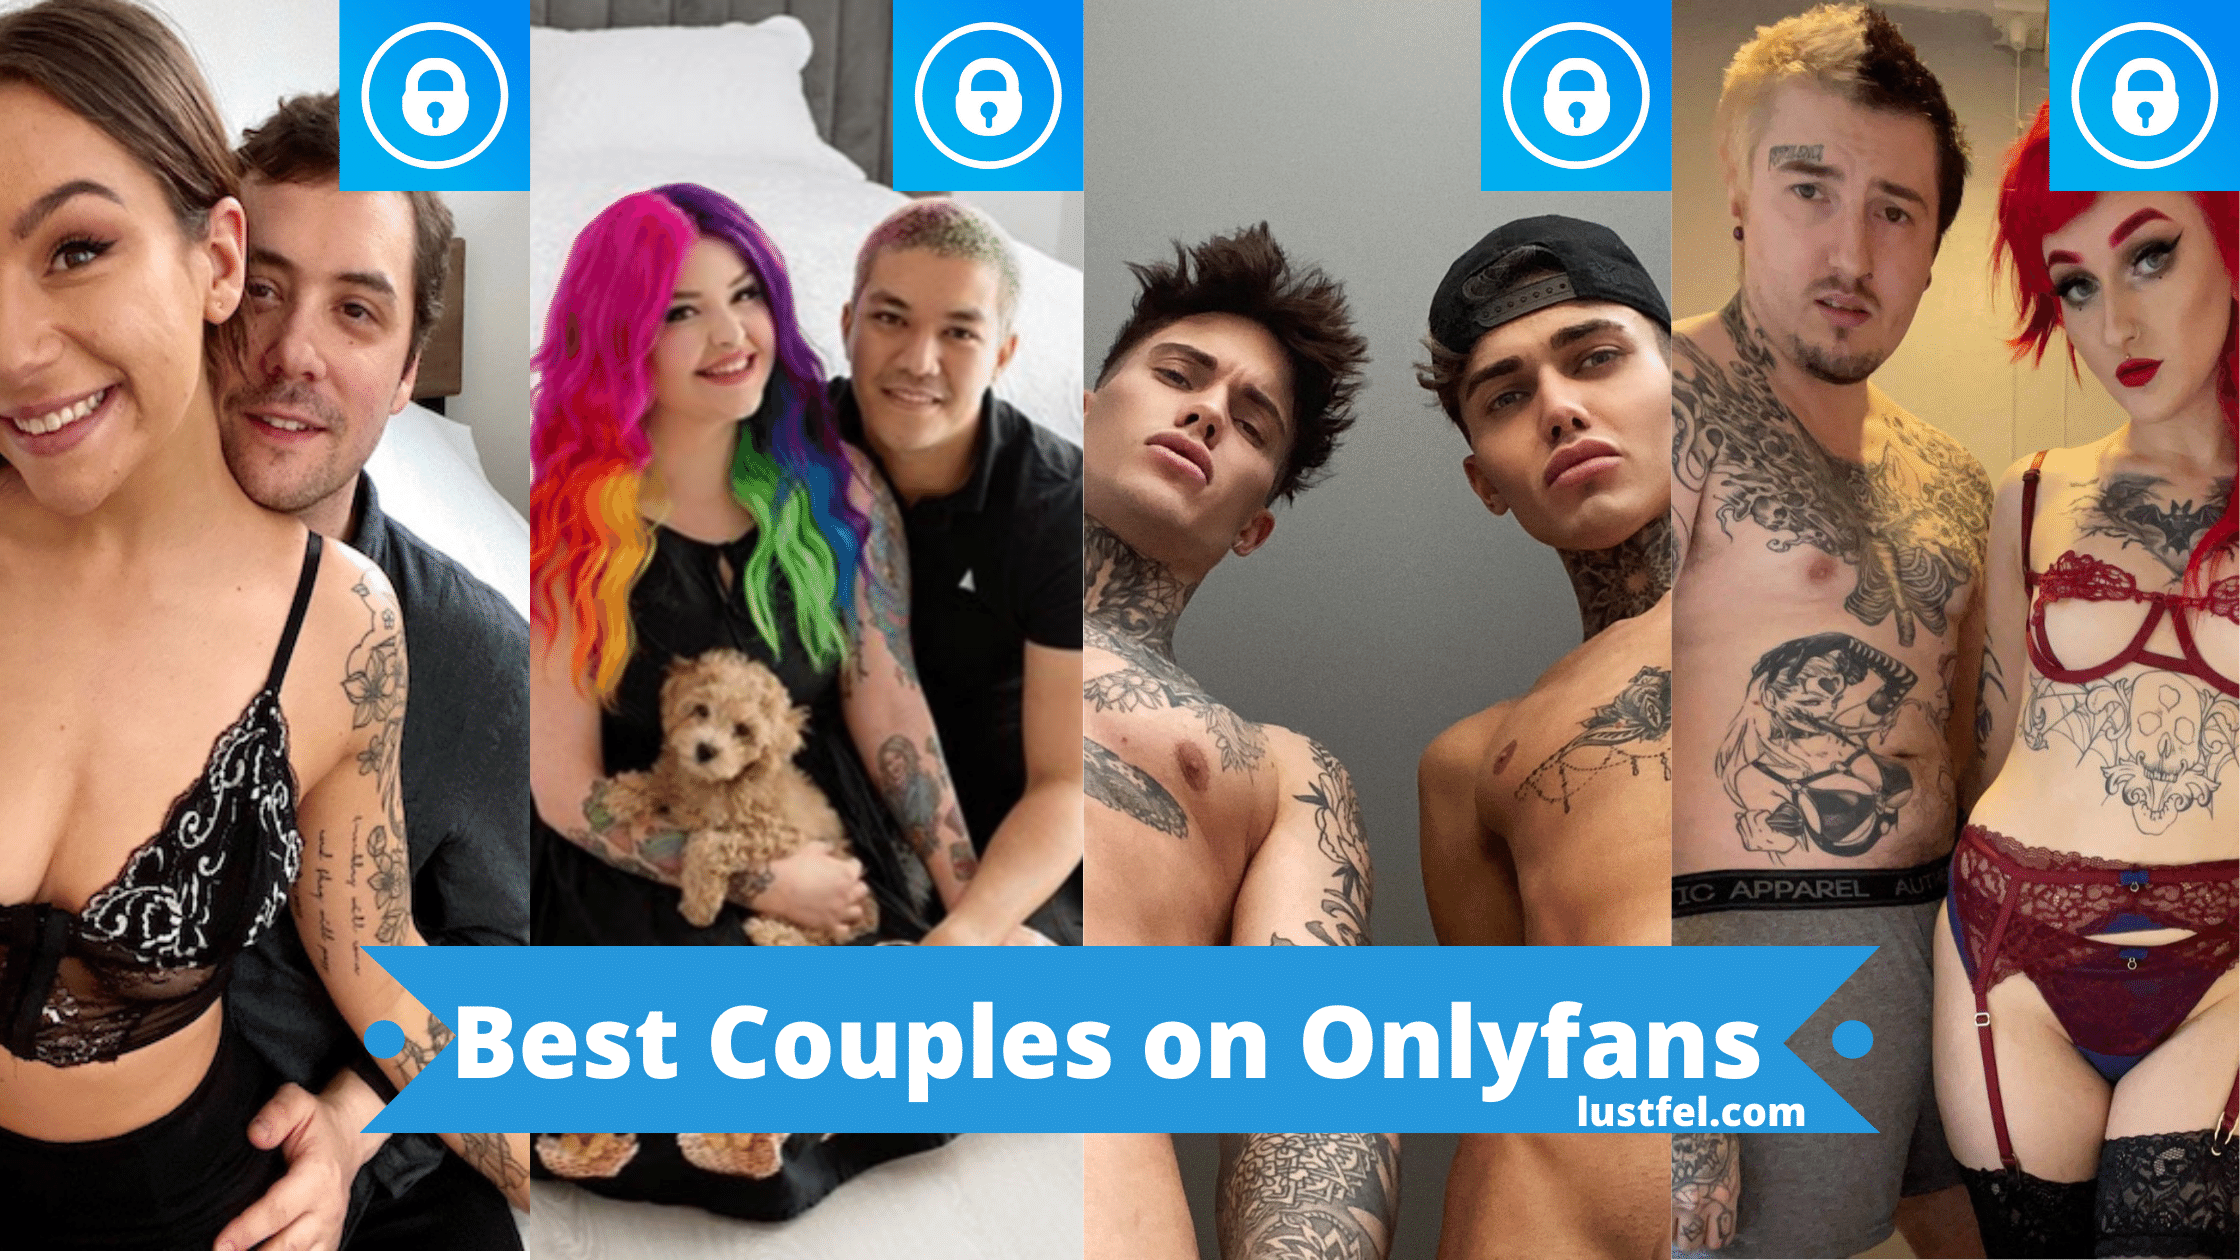 Only fans couples twitter